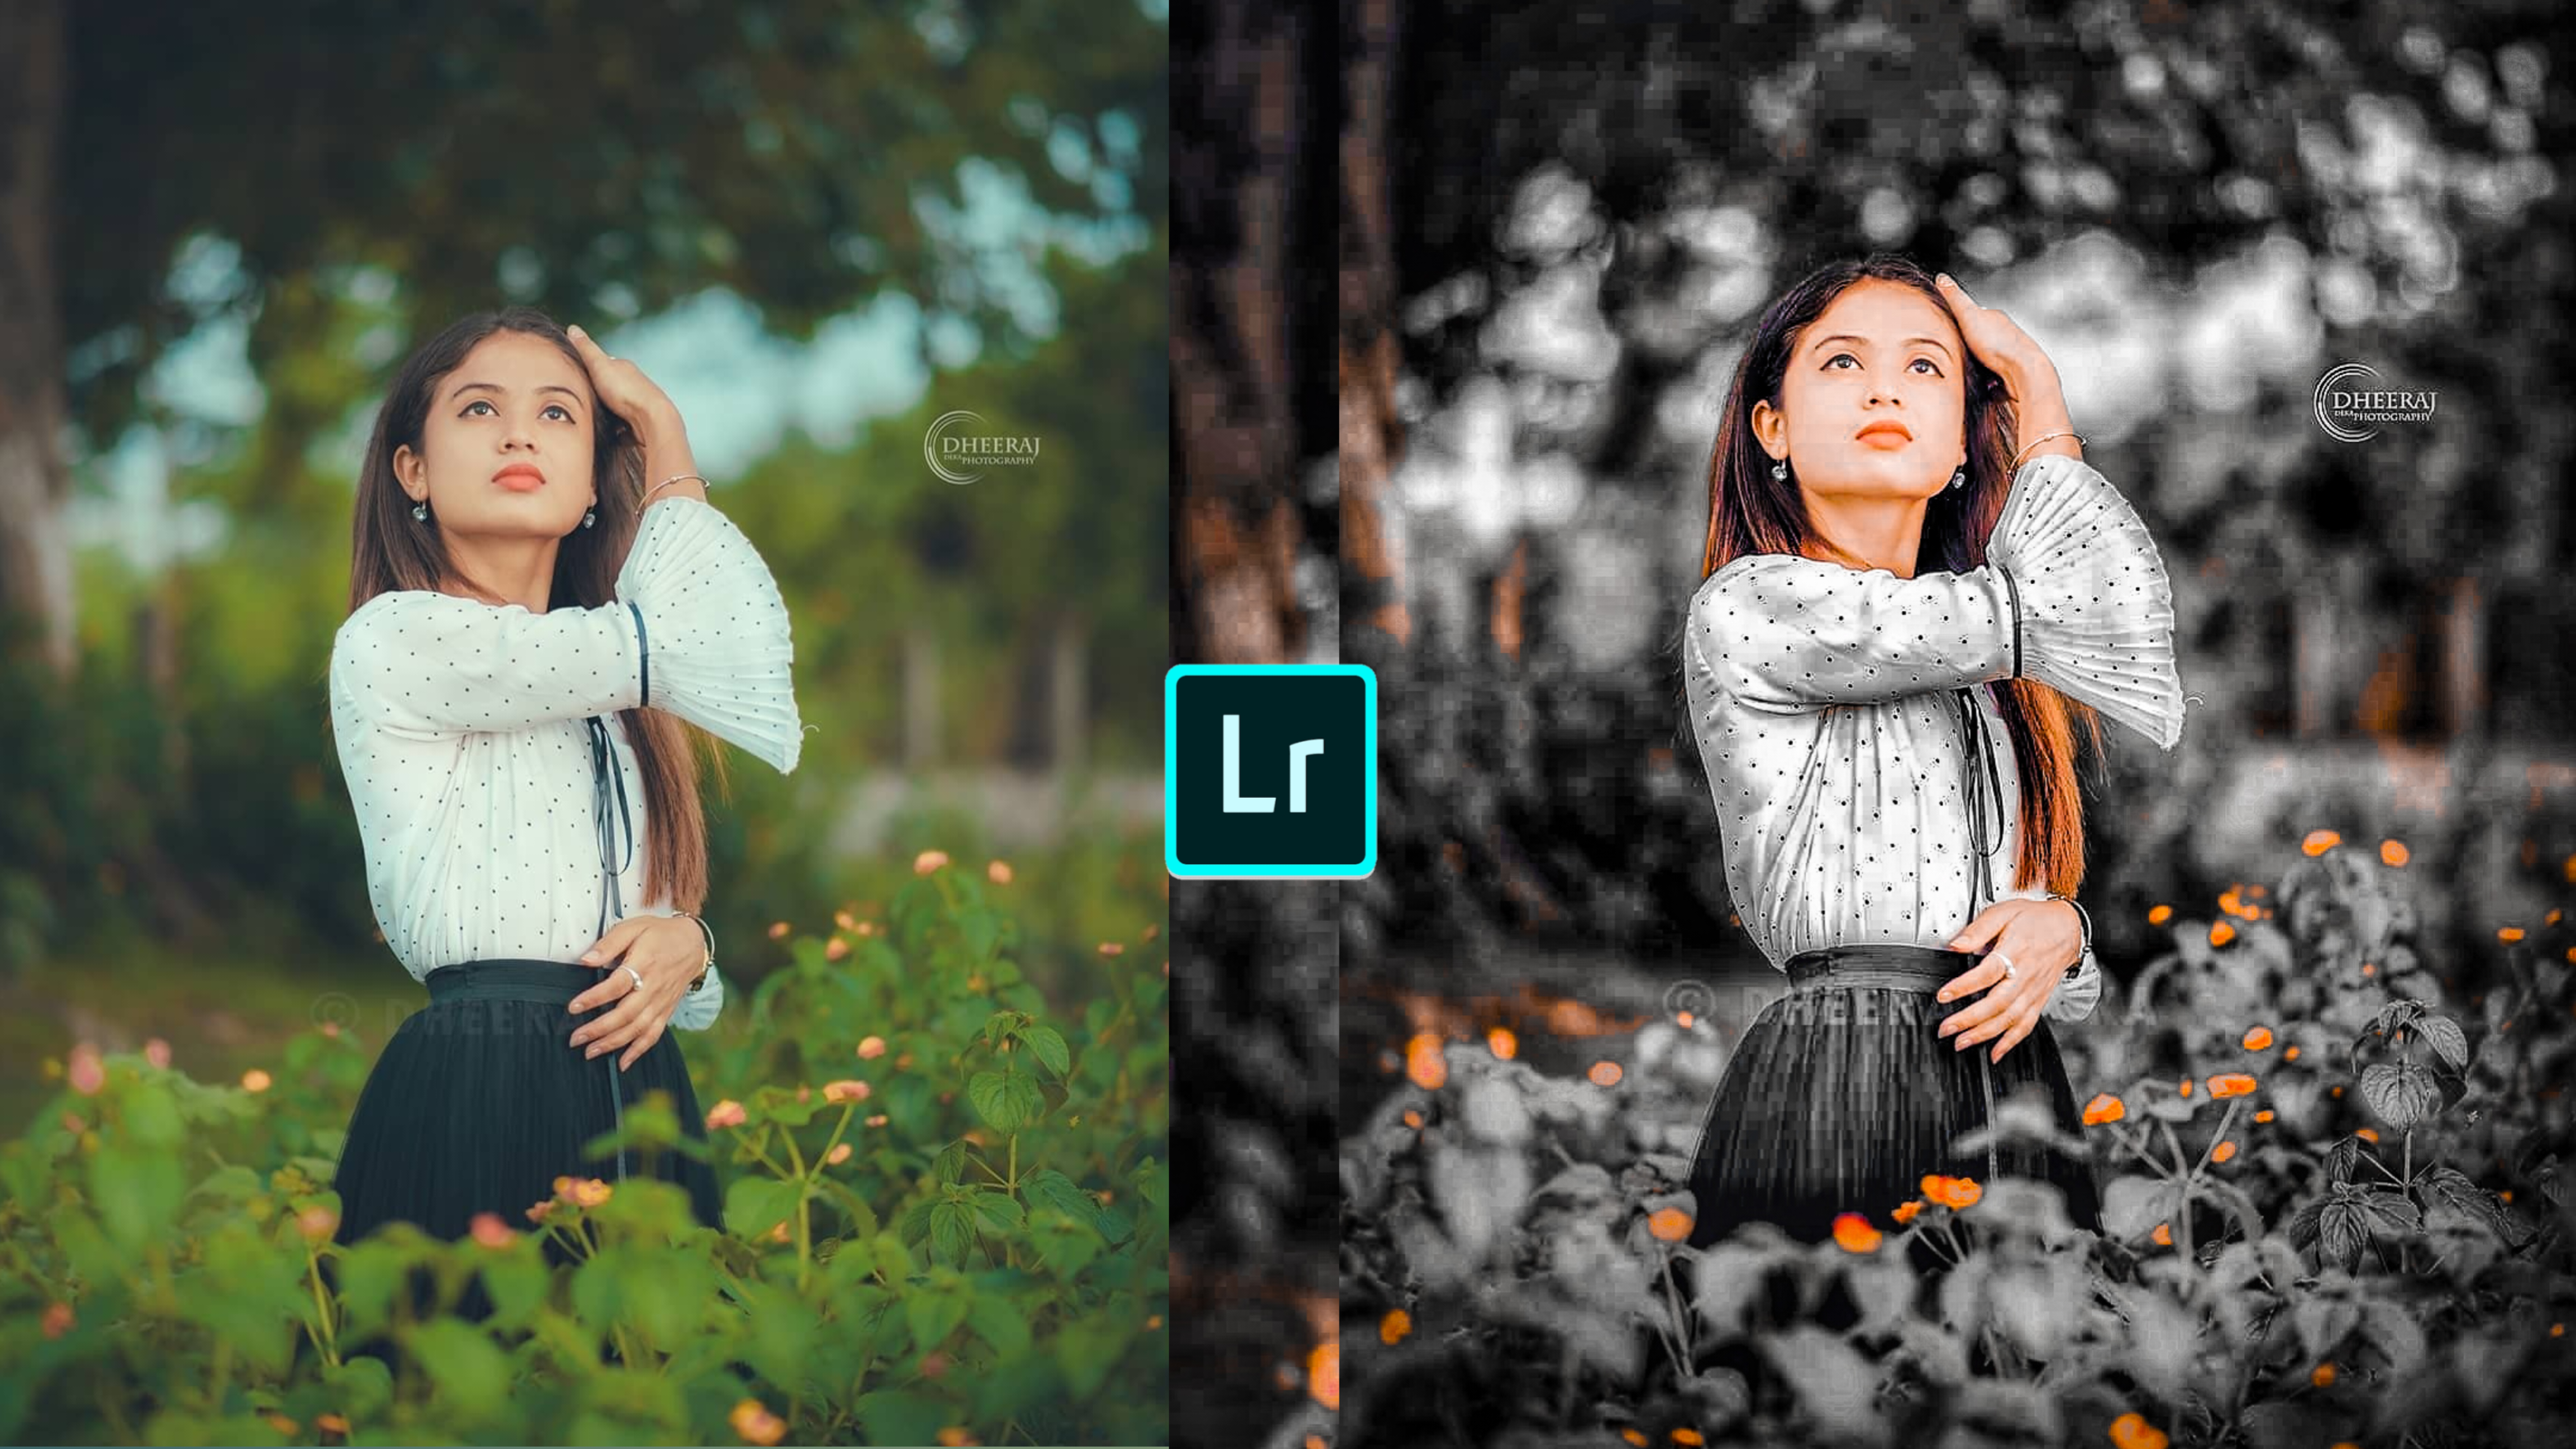 Cb photo editing background | lightroom editing background hd images  download 2023 ~ Movie Kaise Dekhe, Movie Review